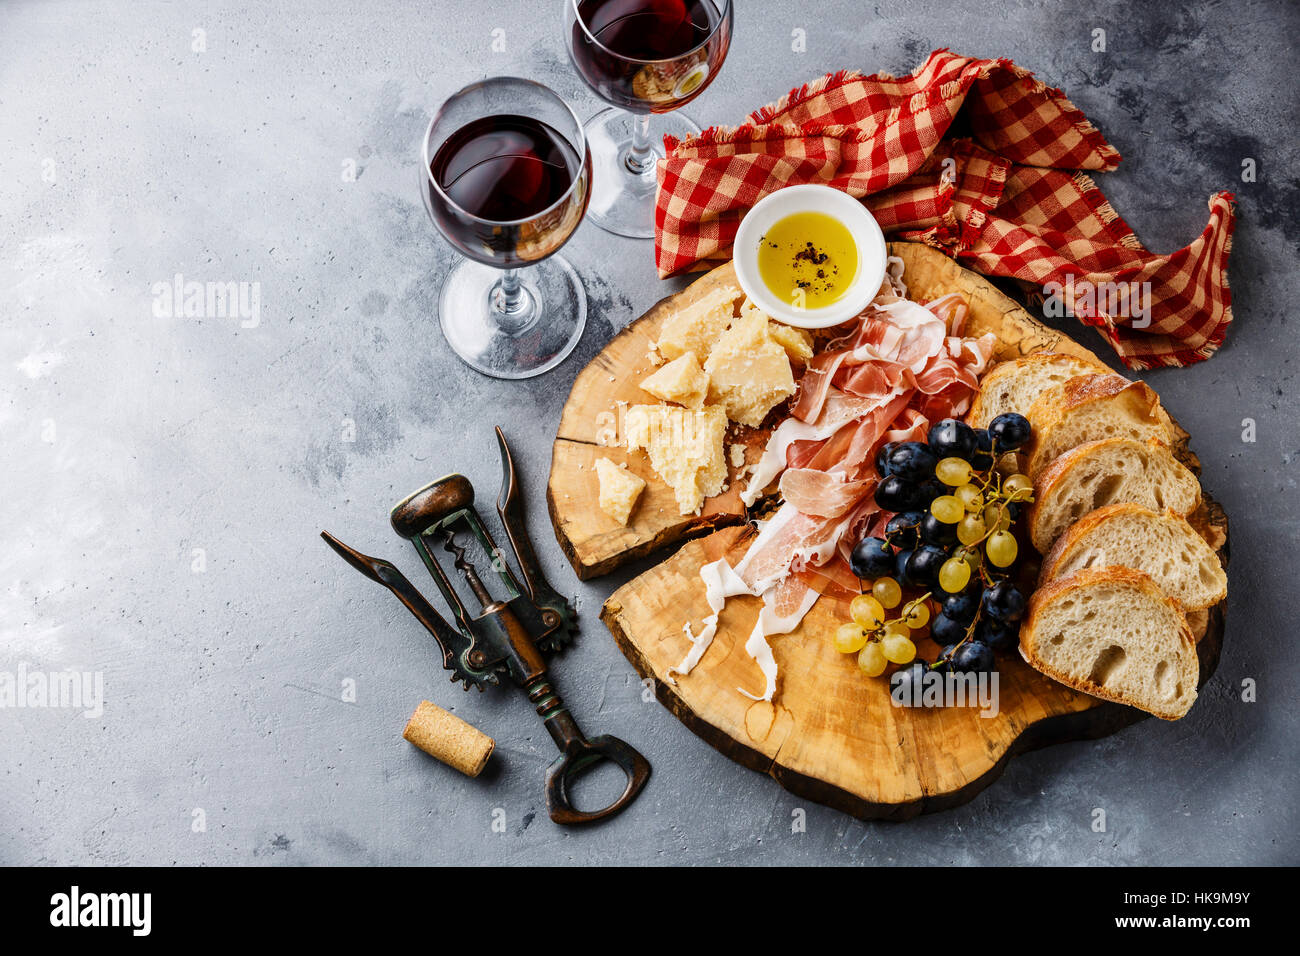 Appetizer plate with prosciutto, parmesan cheese, bread and wine on gray concrete background Stock Photo